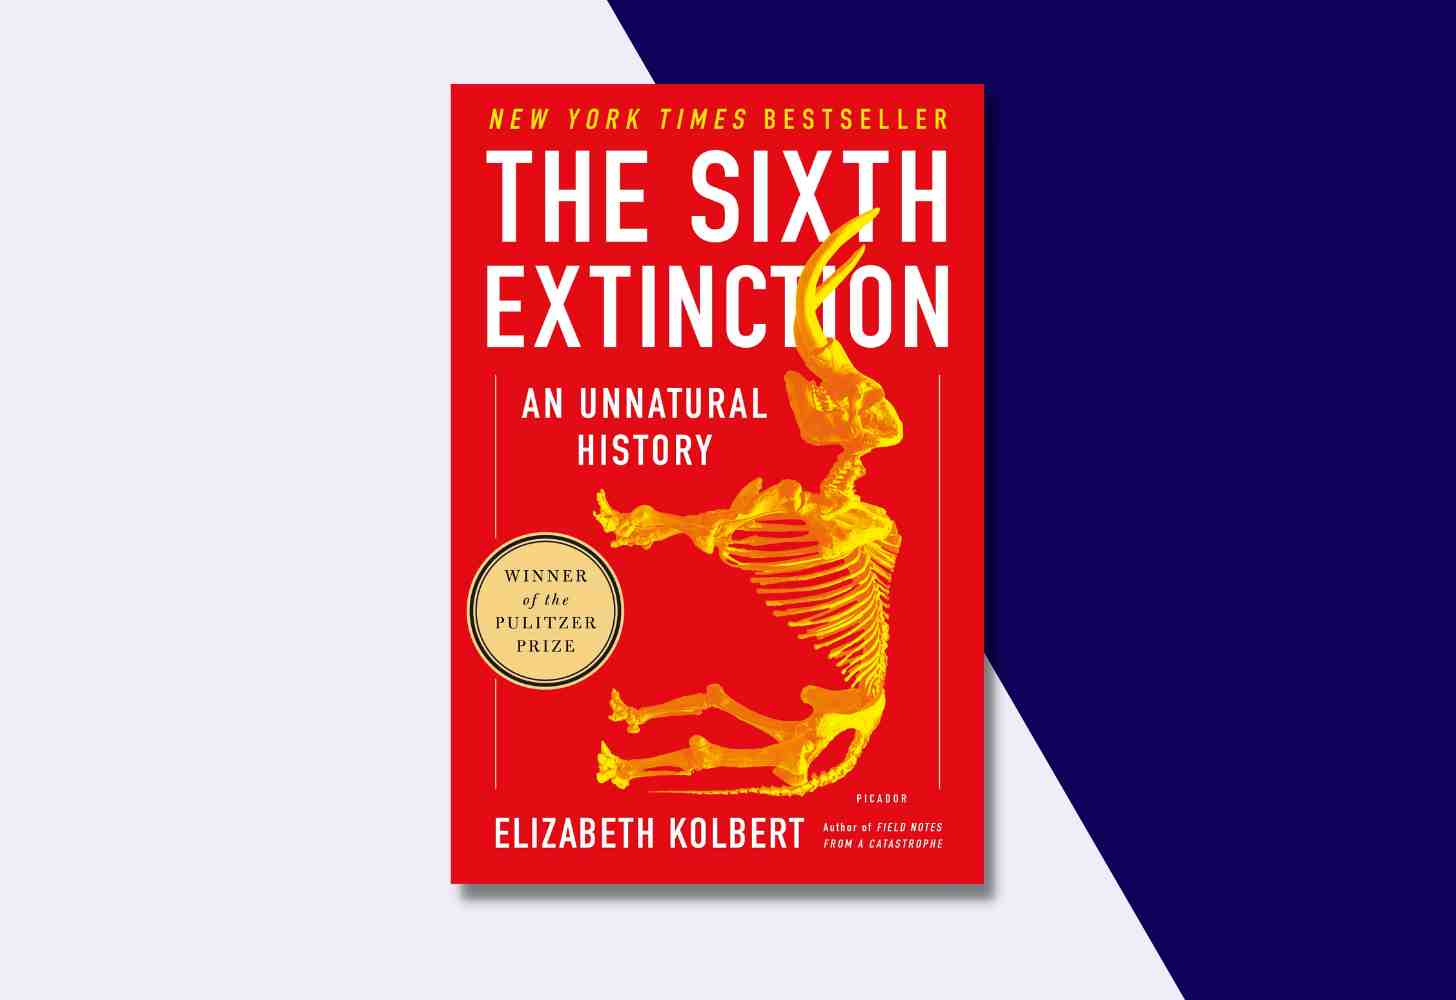 The Cover Of “The Sixth Extinction: An Unnatural History” by Elizabeth Kolbert